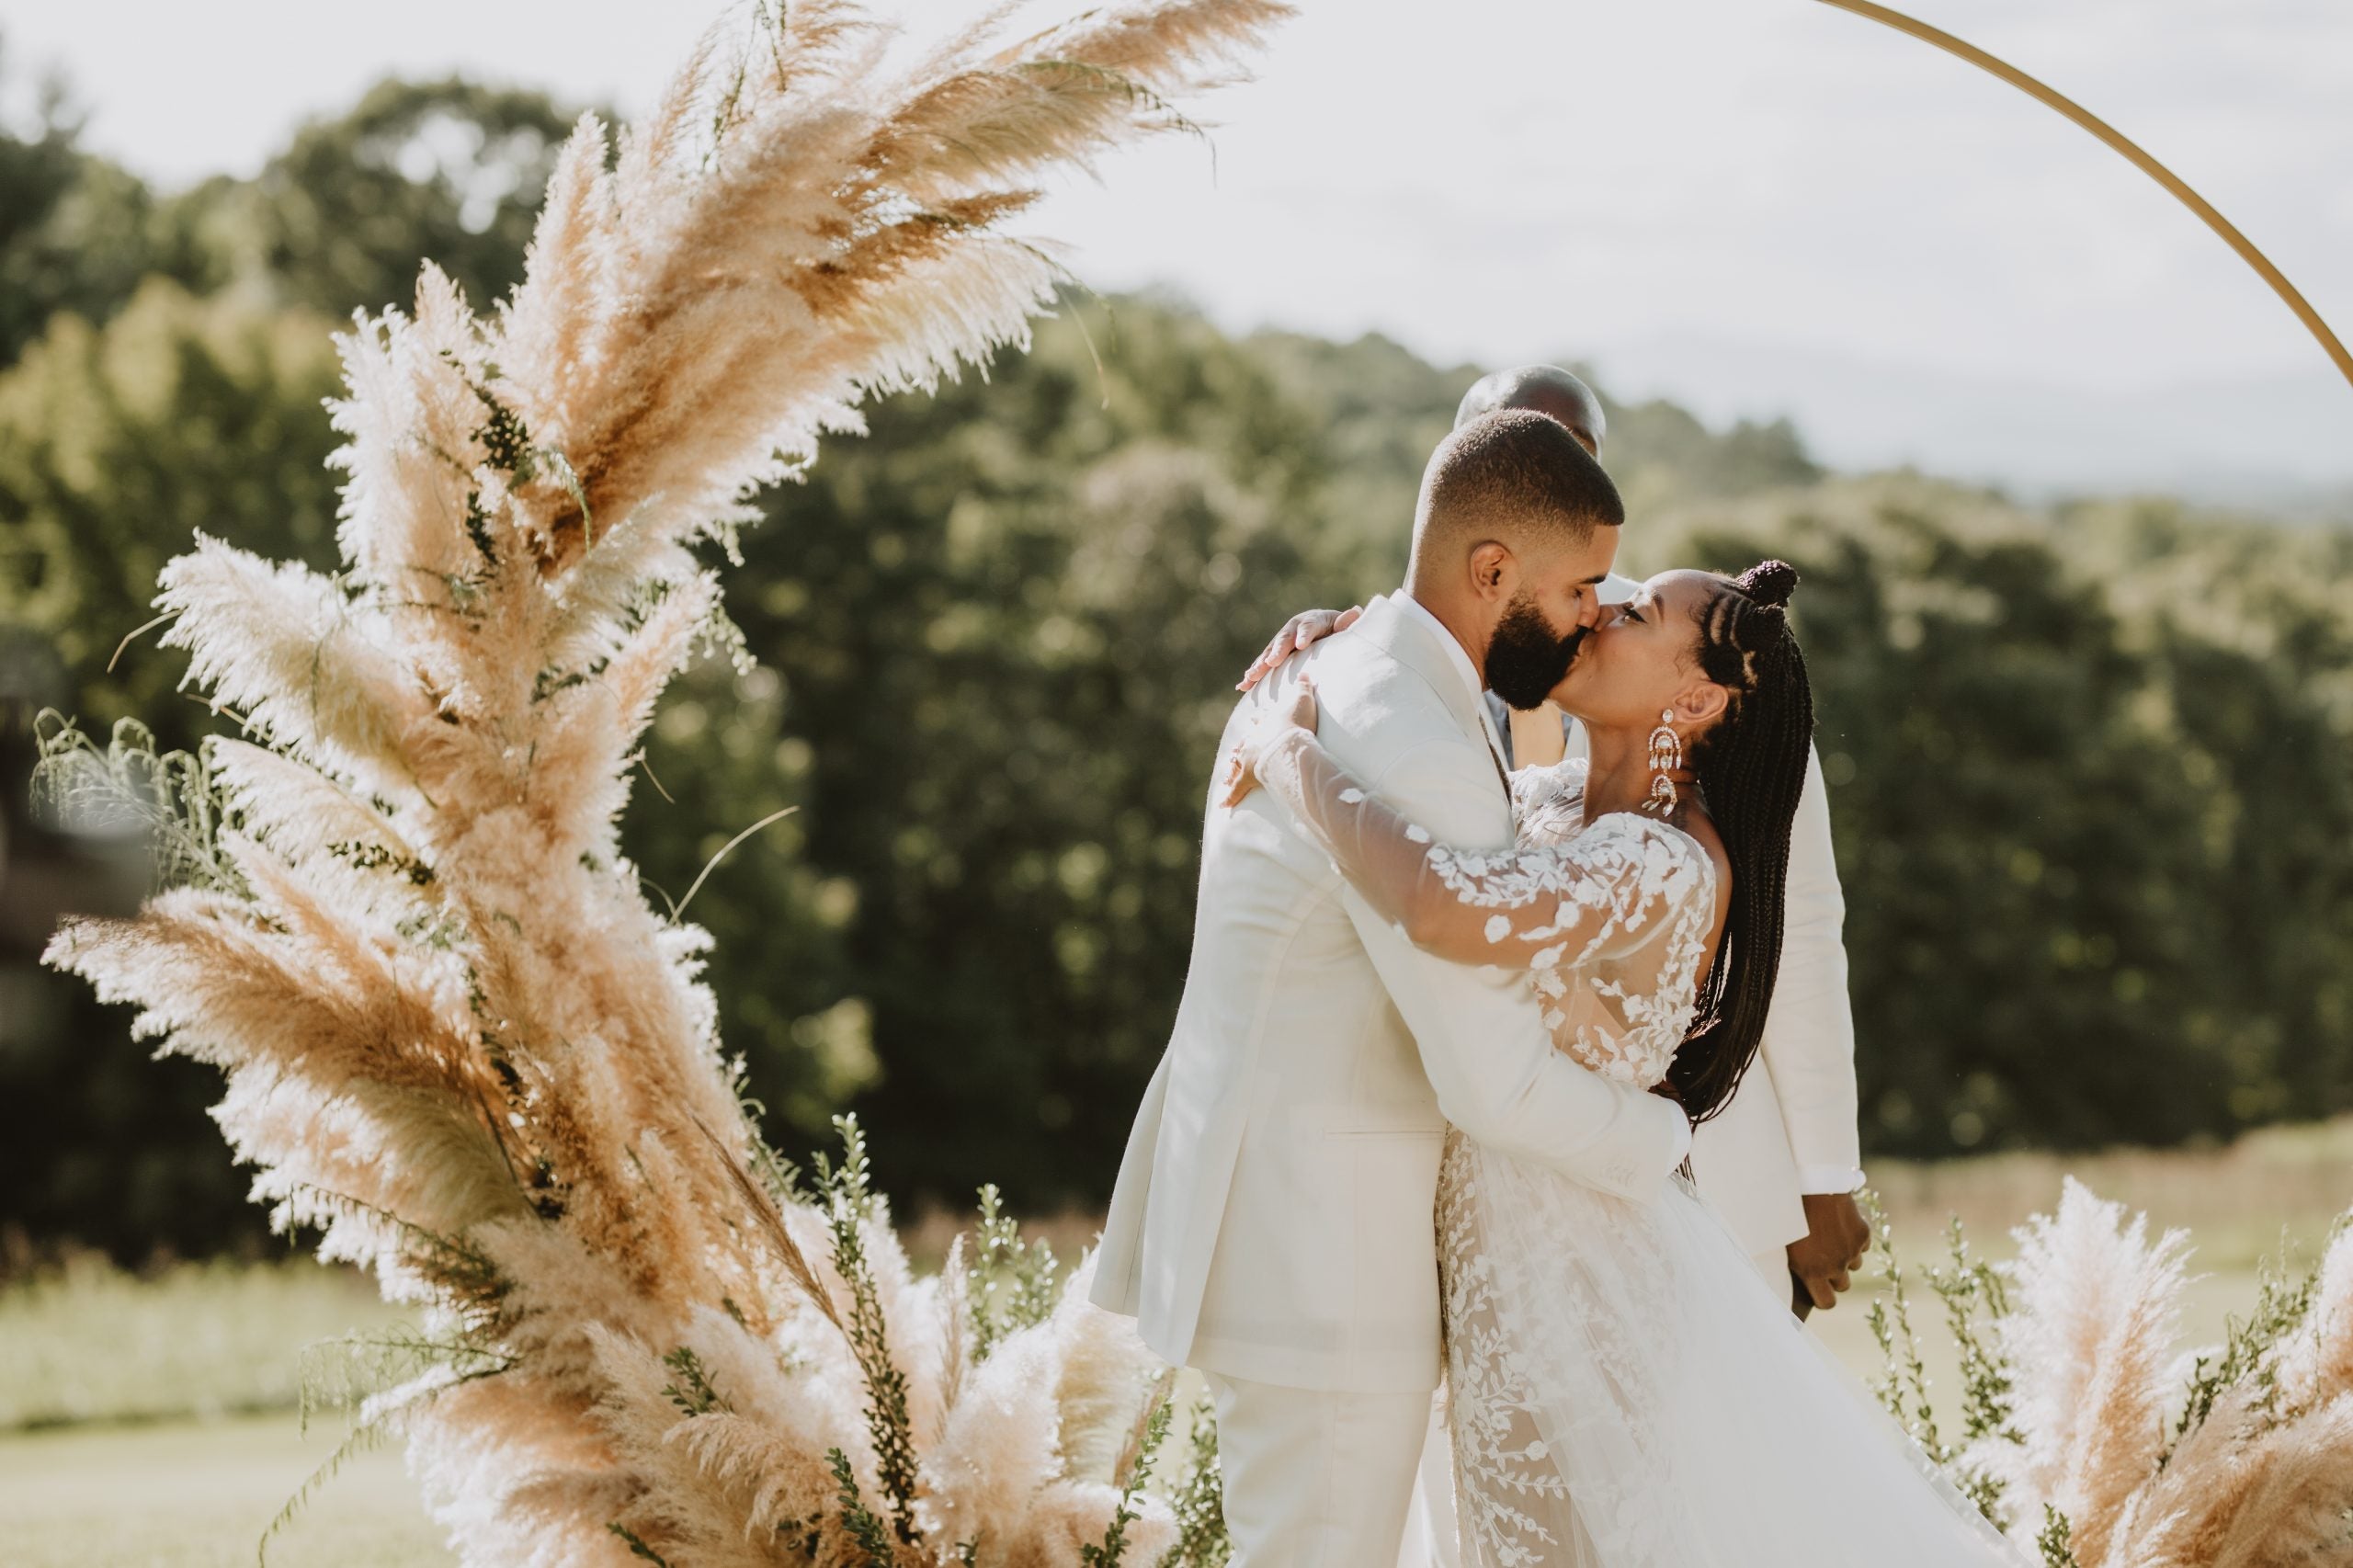 Rosco And Matthew's Ethereal North Carolina Wedding Was Intimate and Magical